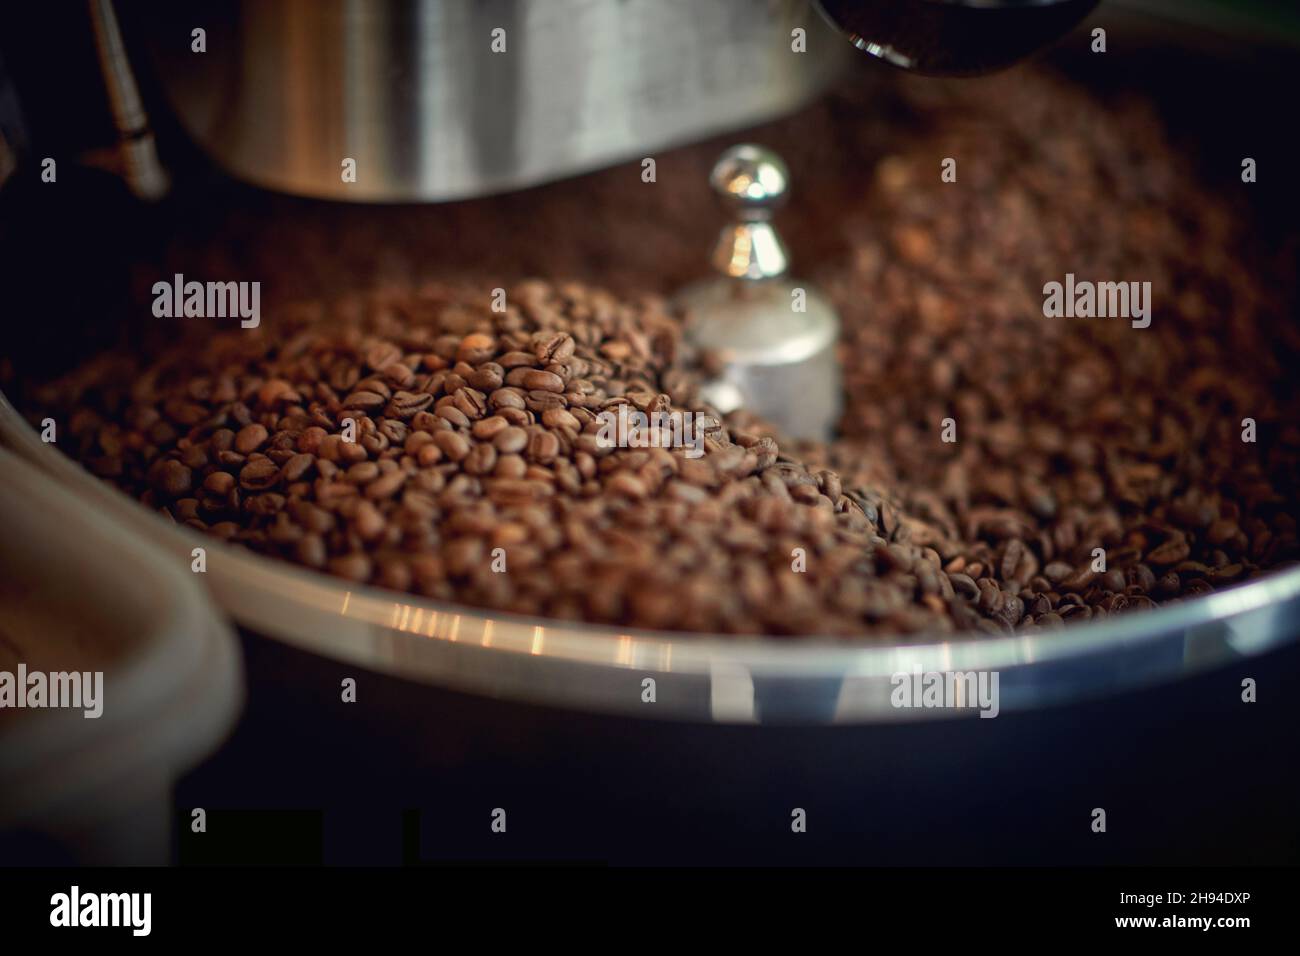 Aromatic and fragrant coffee beans are grinding in the grinder apparatus. Coffee, beverage, producing Stock Photo